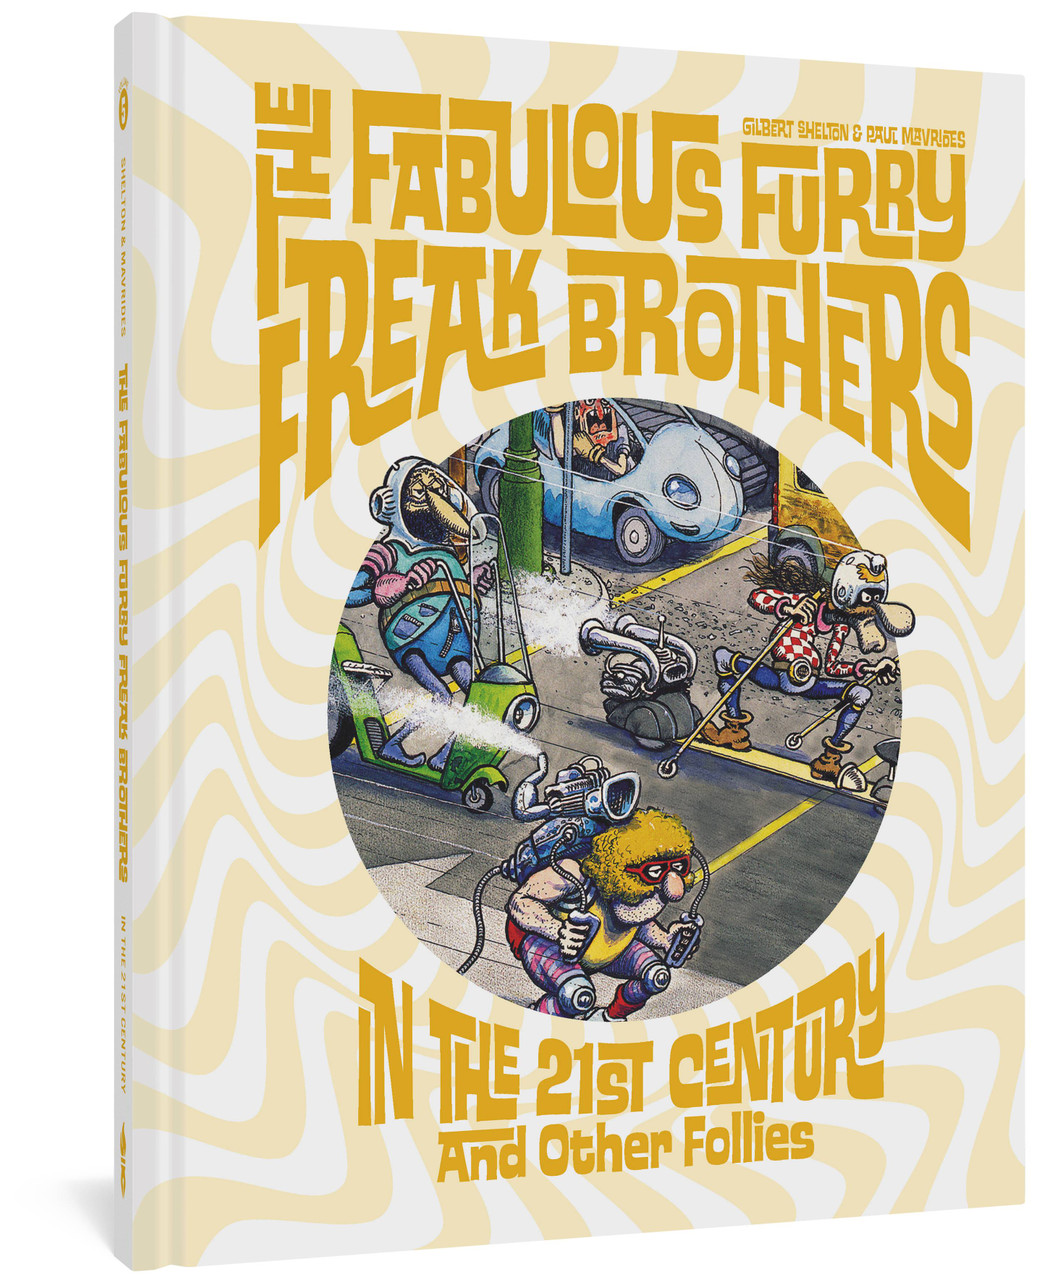 FABULOUS FURRY FREAK BROTHERS IN THE 21ST CENTURY